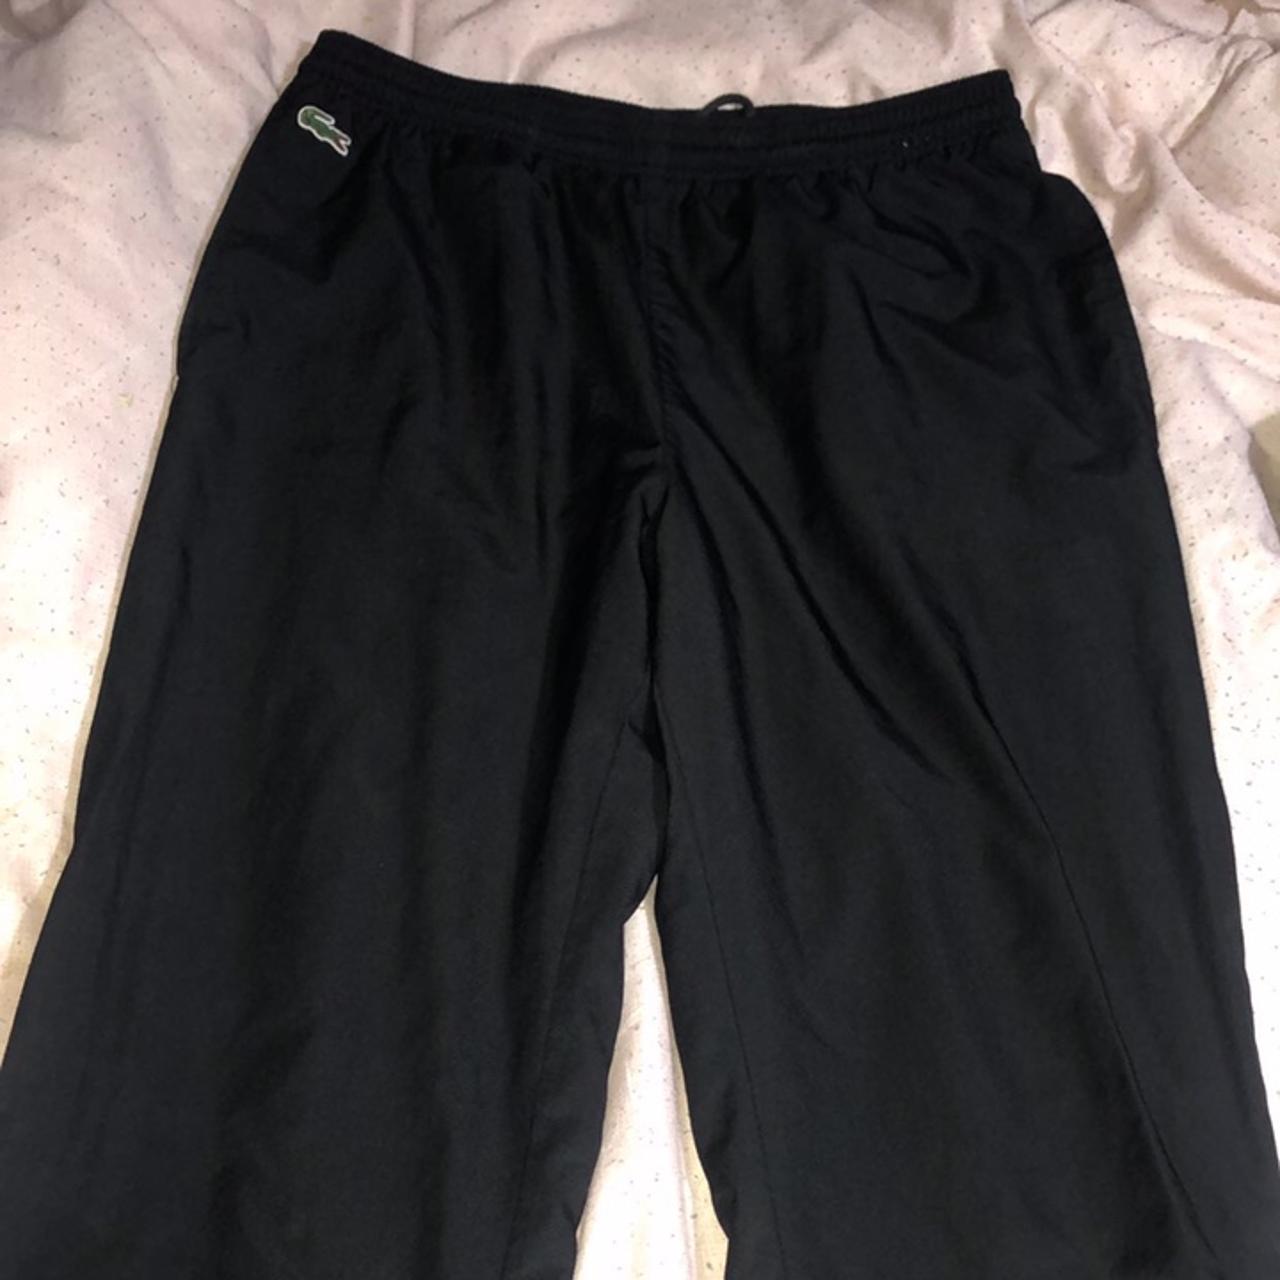 Black pair of Lacoste baggies worn once but don’t... - Depop